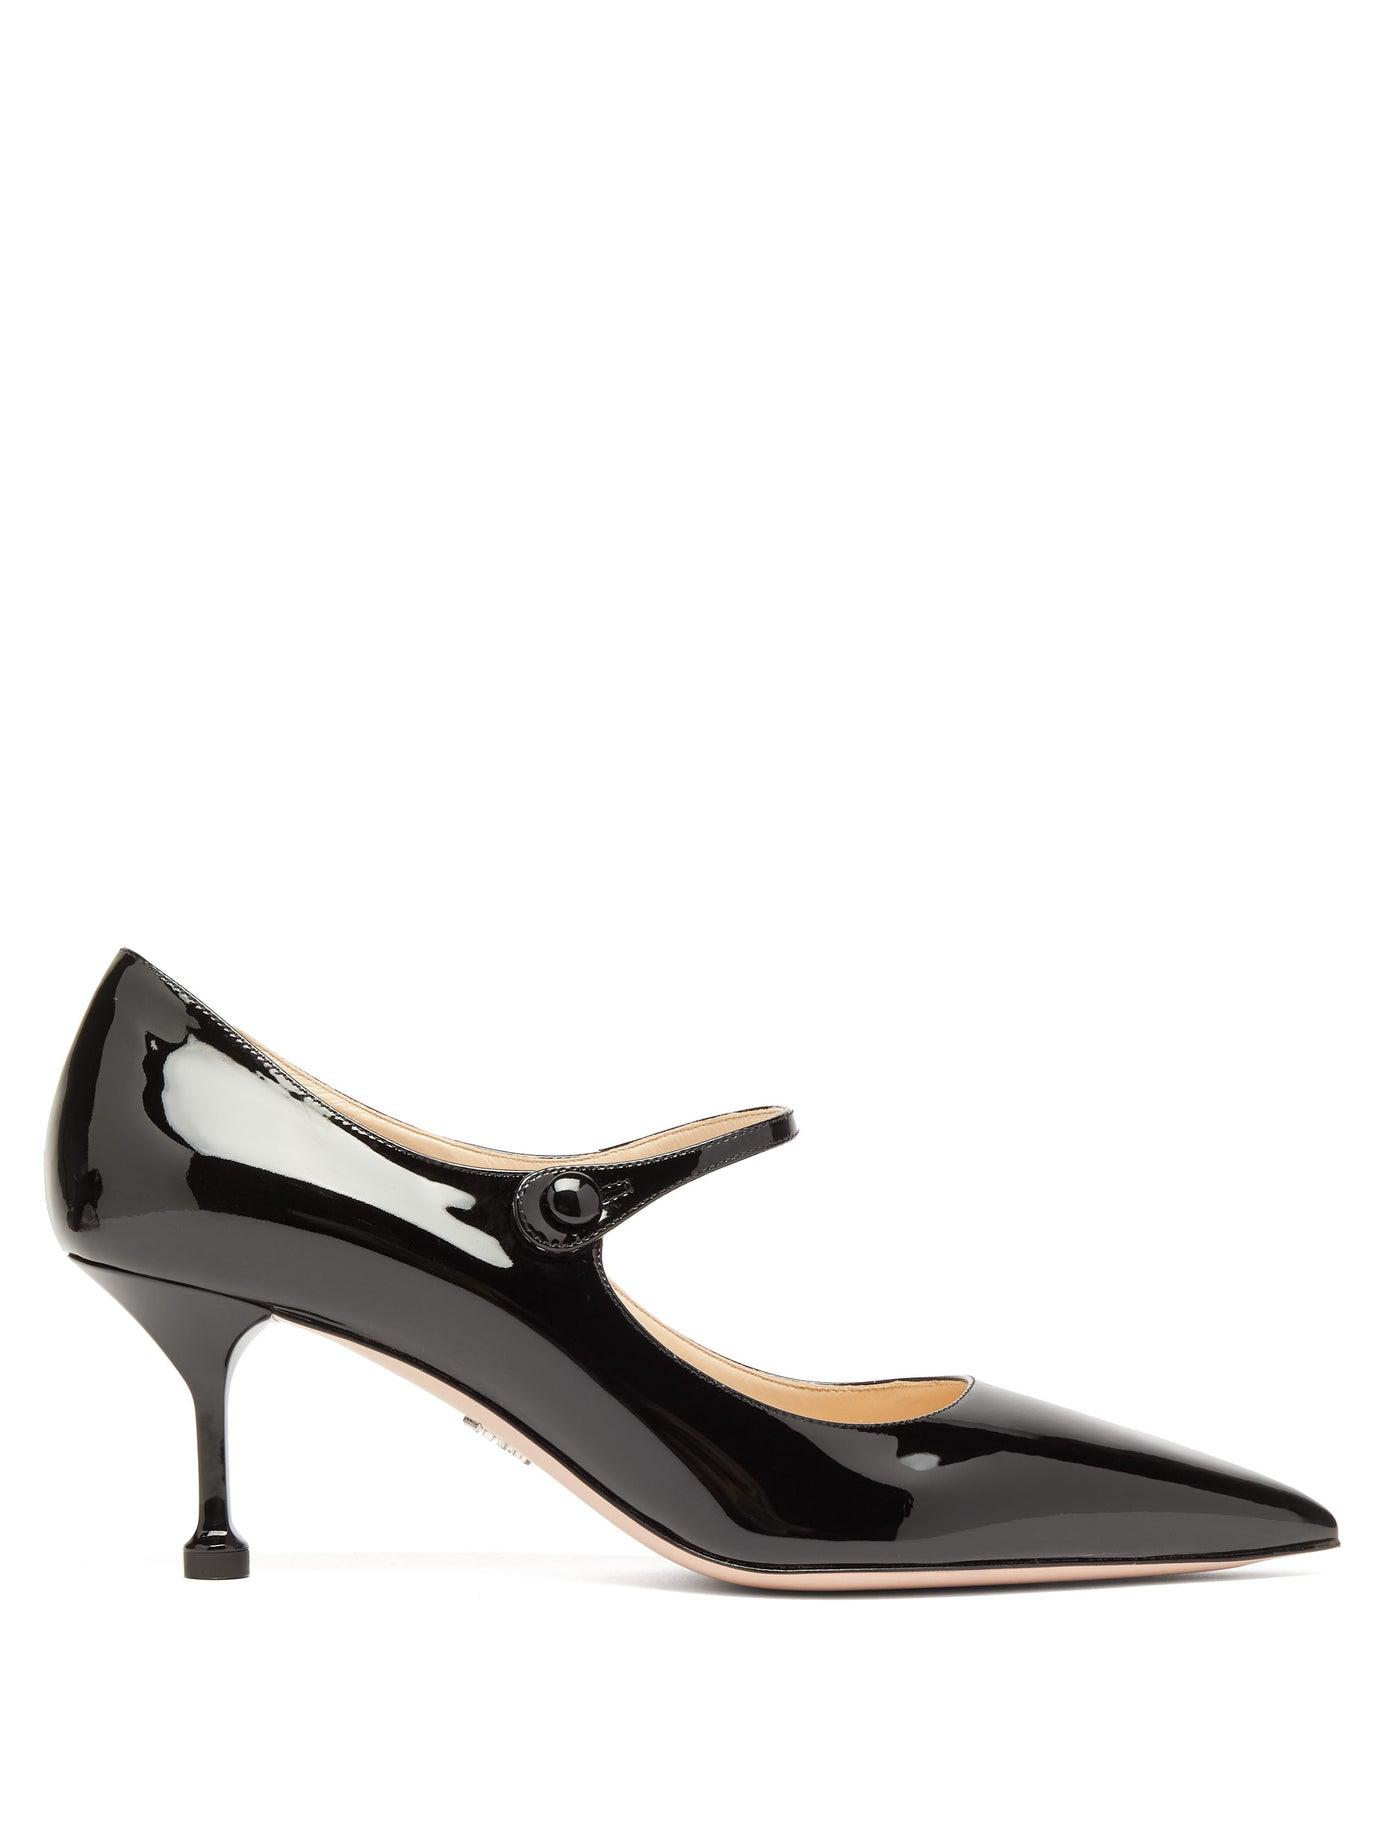 Prada Point-toe Patent-leather Mary-jane Pumps in Black | Lyst